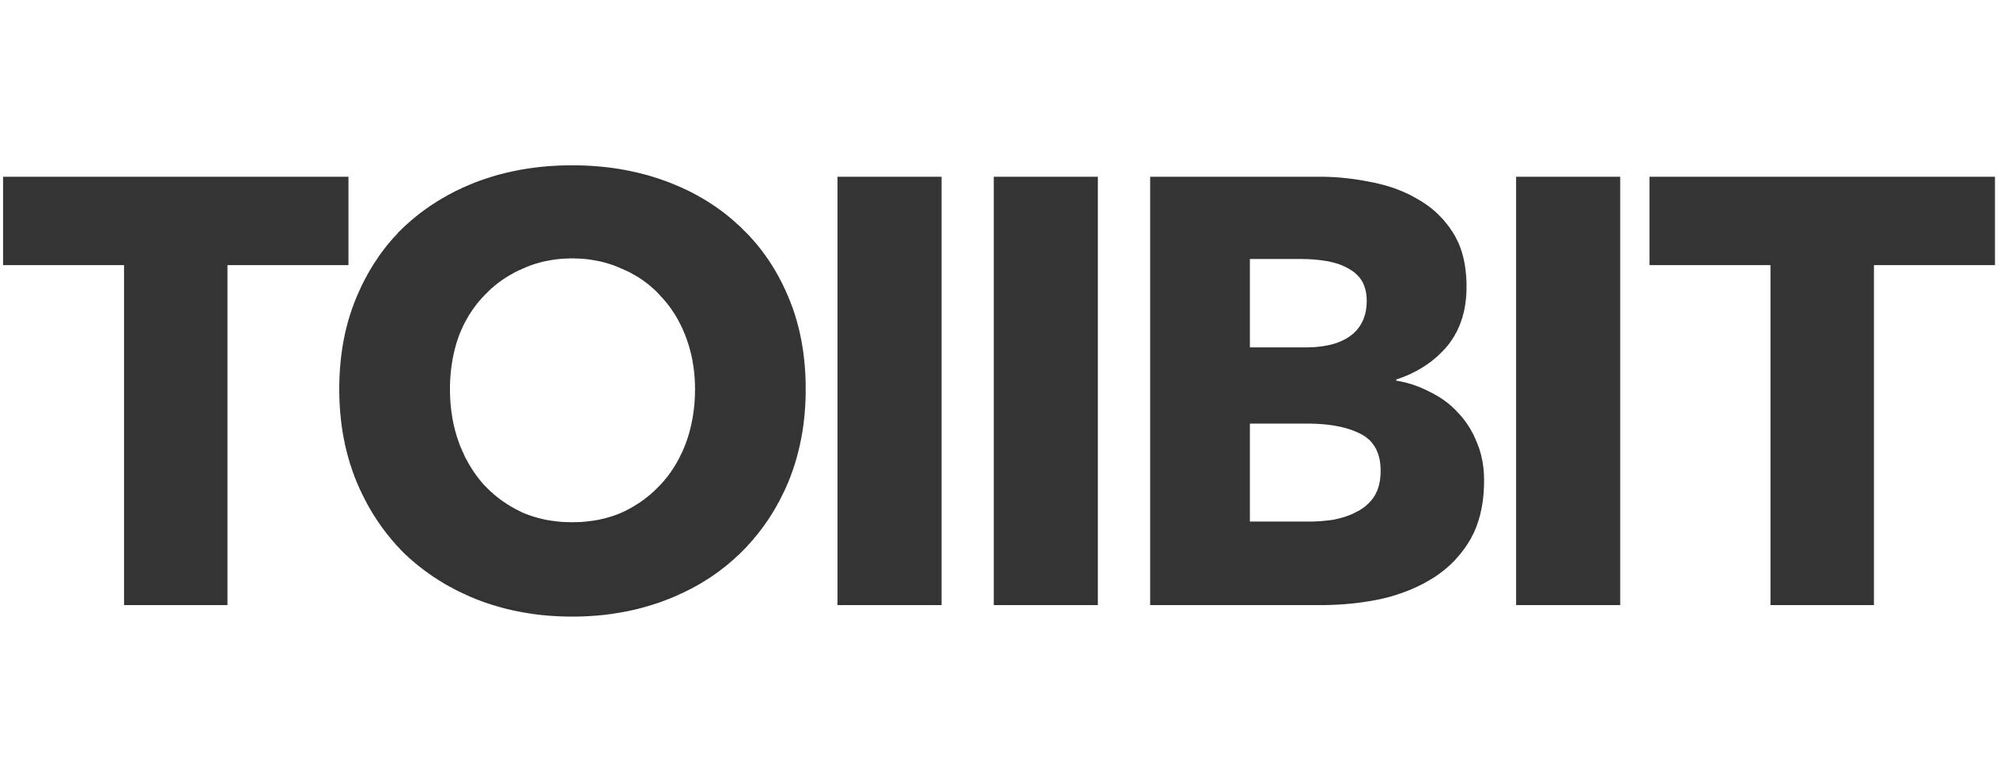 TollBit Secures $7 Million in Investment Round